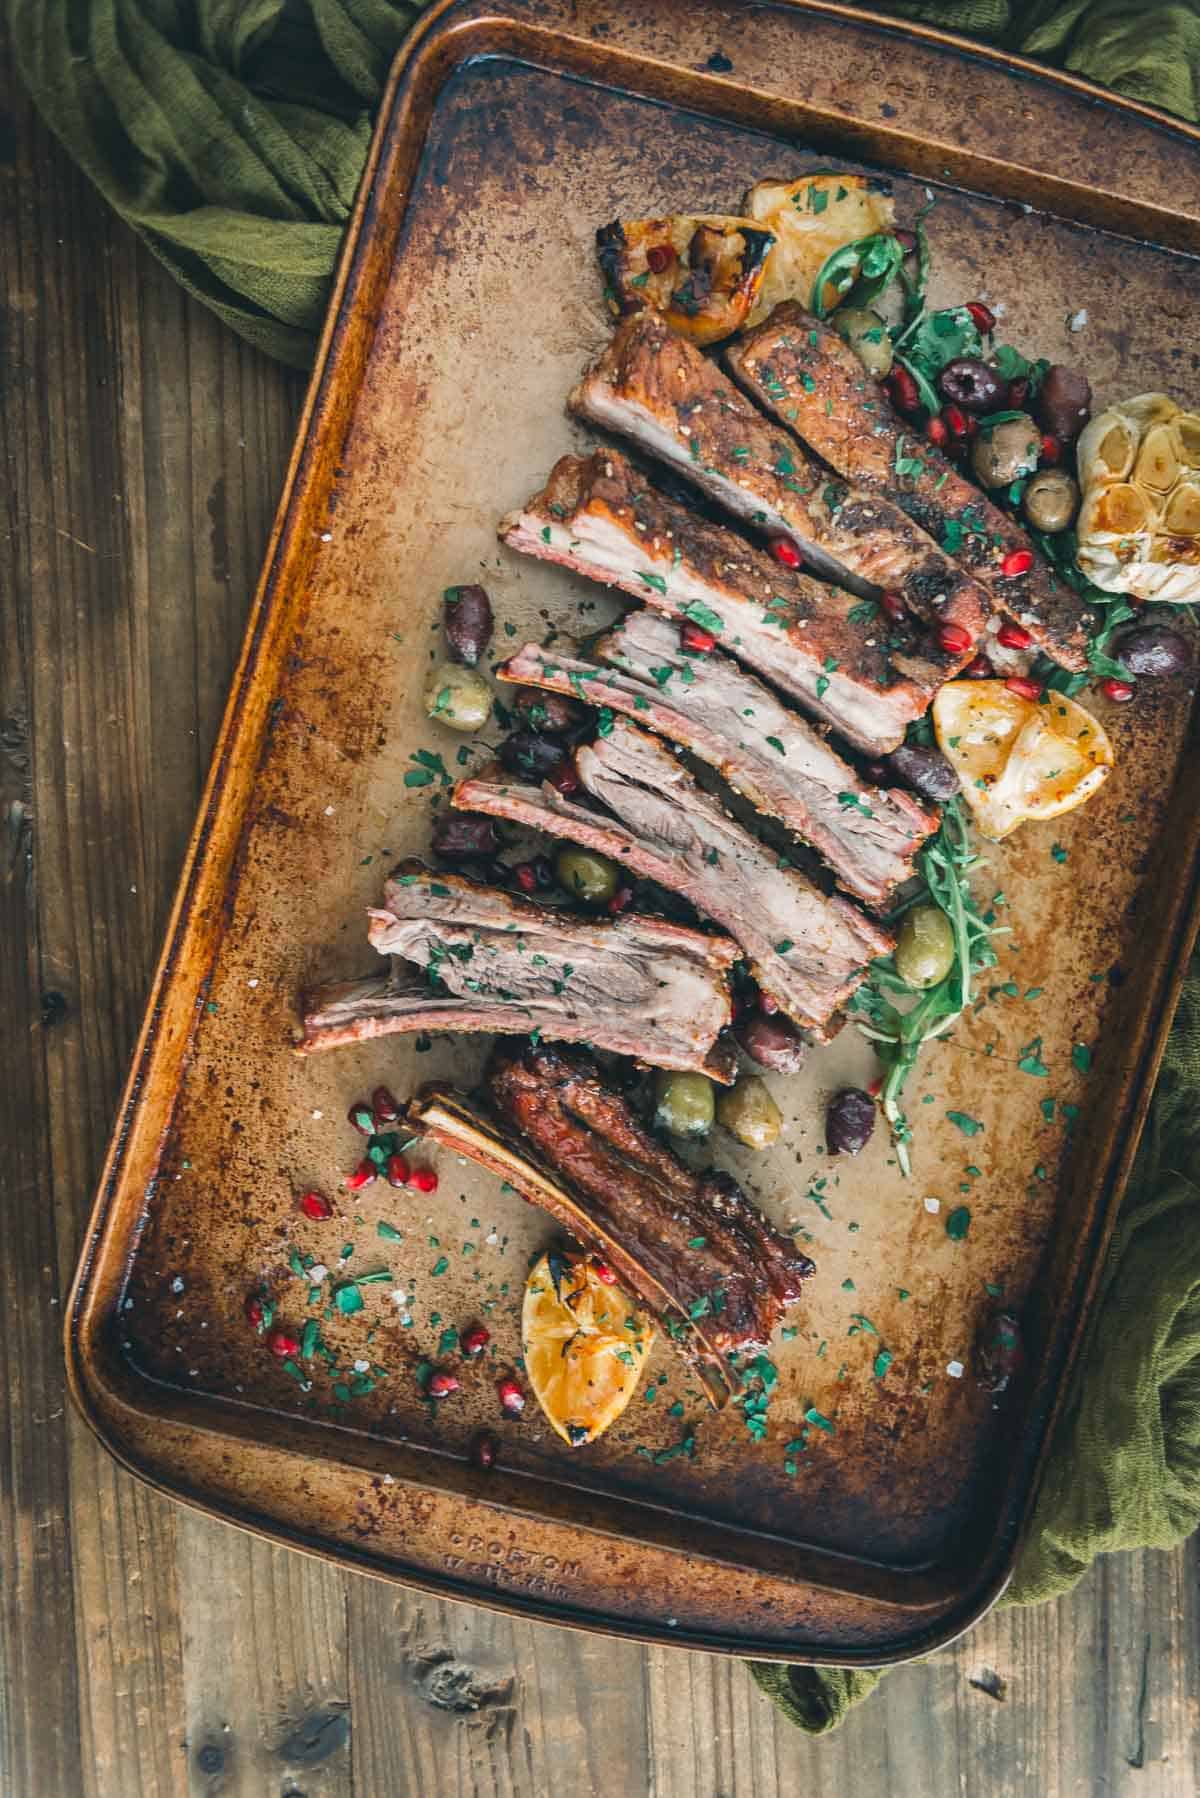 Tender lamb ribs sliced into individual ribs on a platter with olives, garlic and pomegranate seeds.